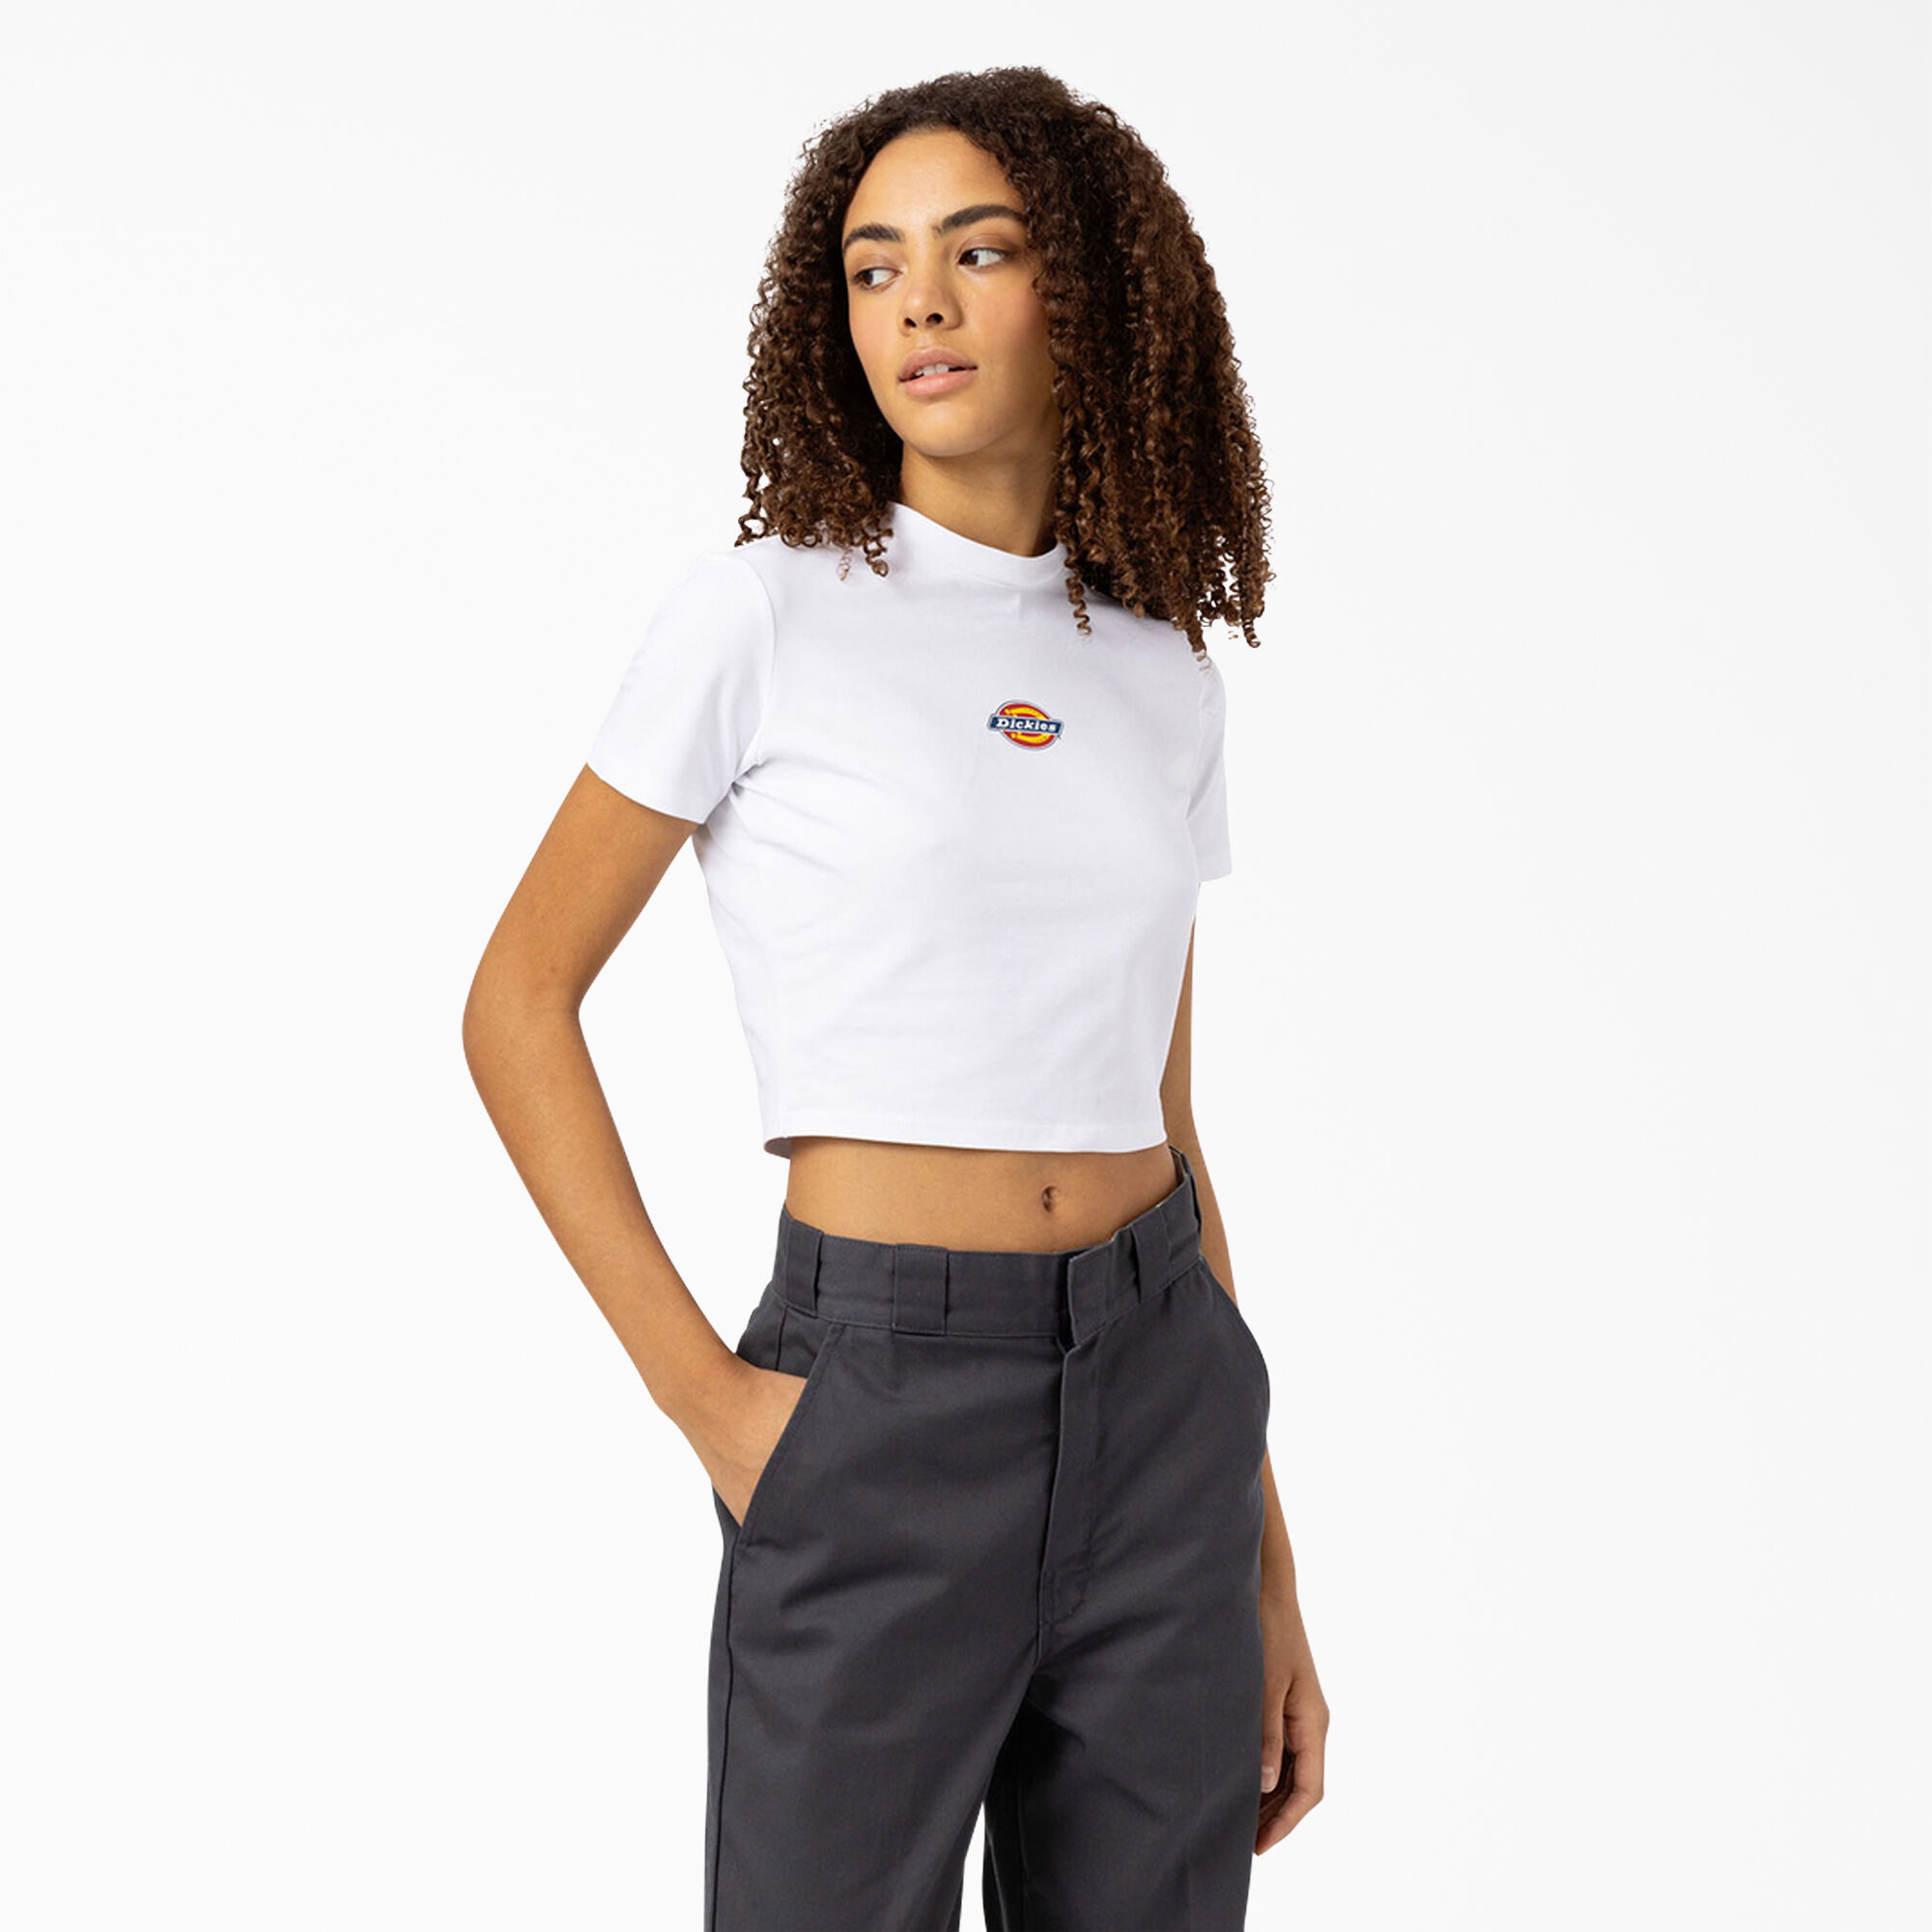 Visiter la boutique DickiesDickies 85825 Women's V-Neck Top What A Breeze X-Small 